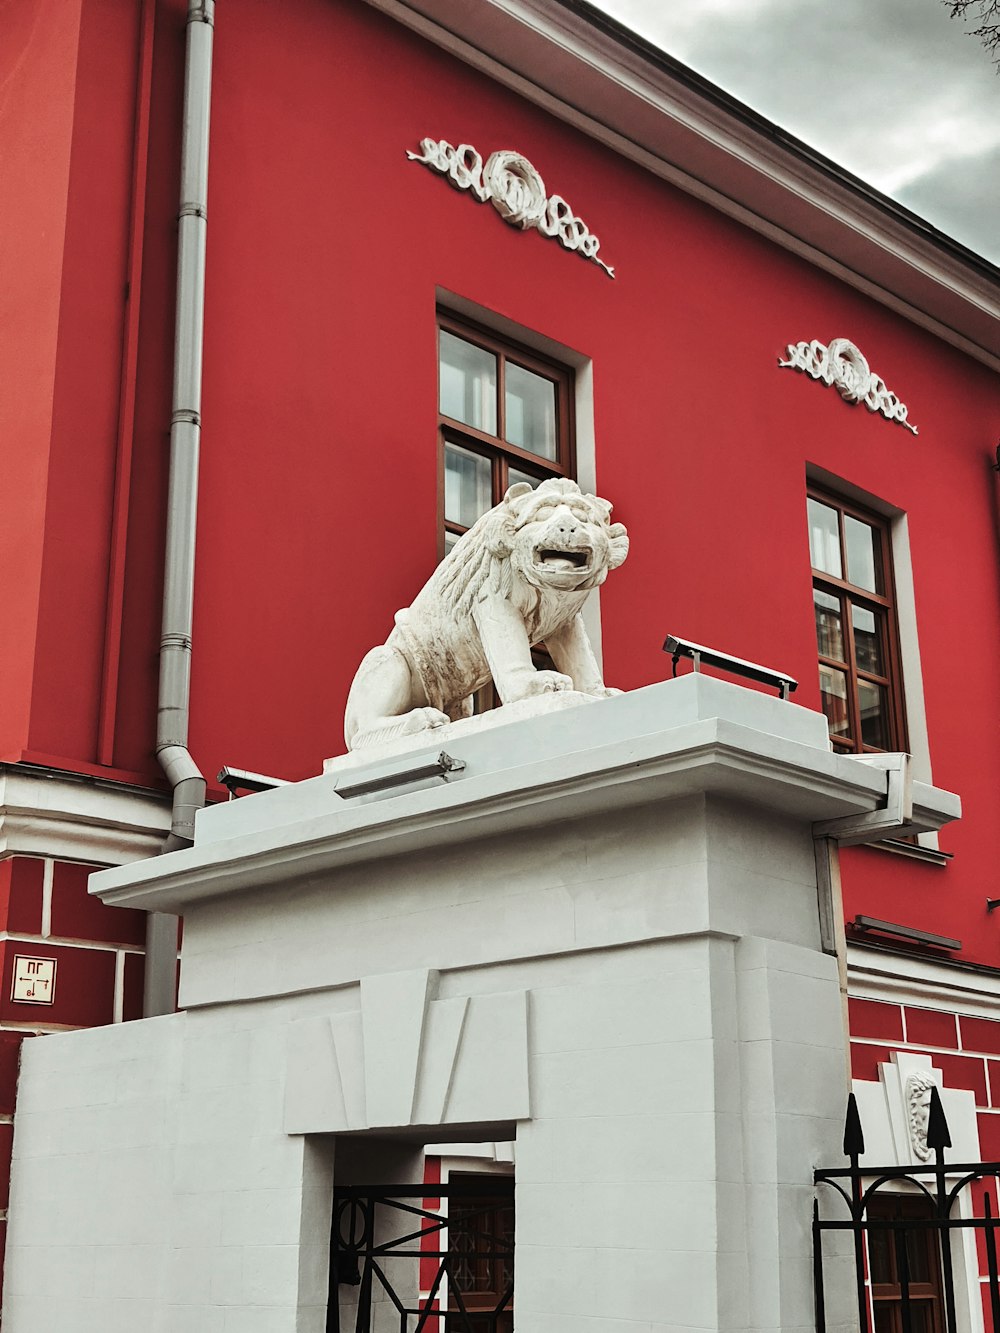 a statue of a lion on a pedestal in front of a red building